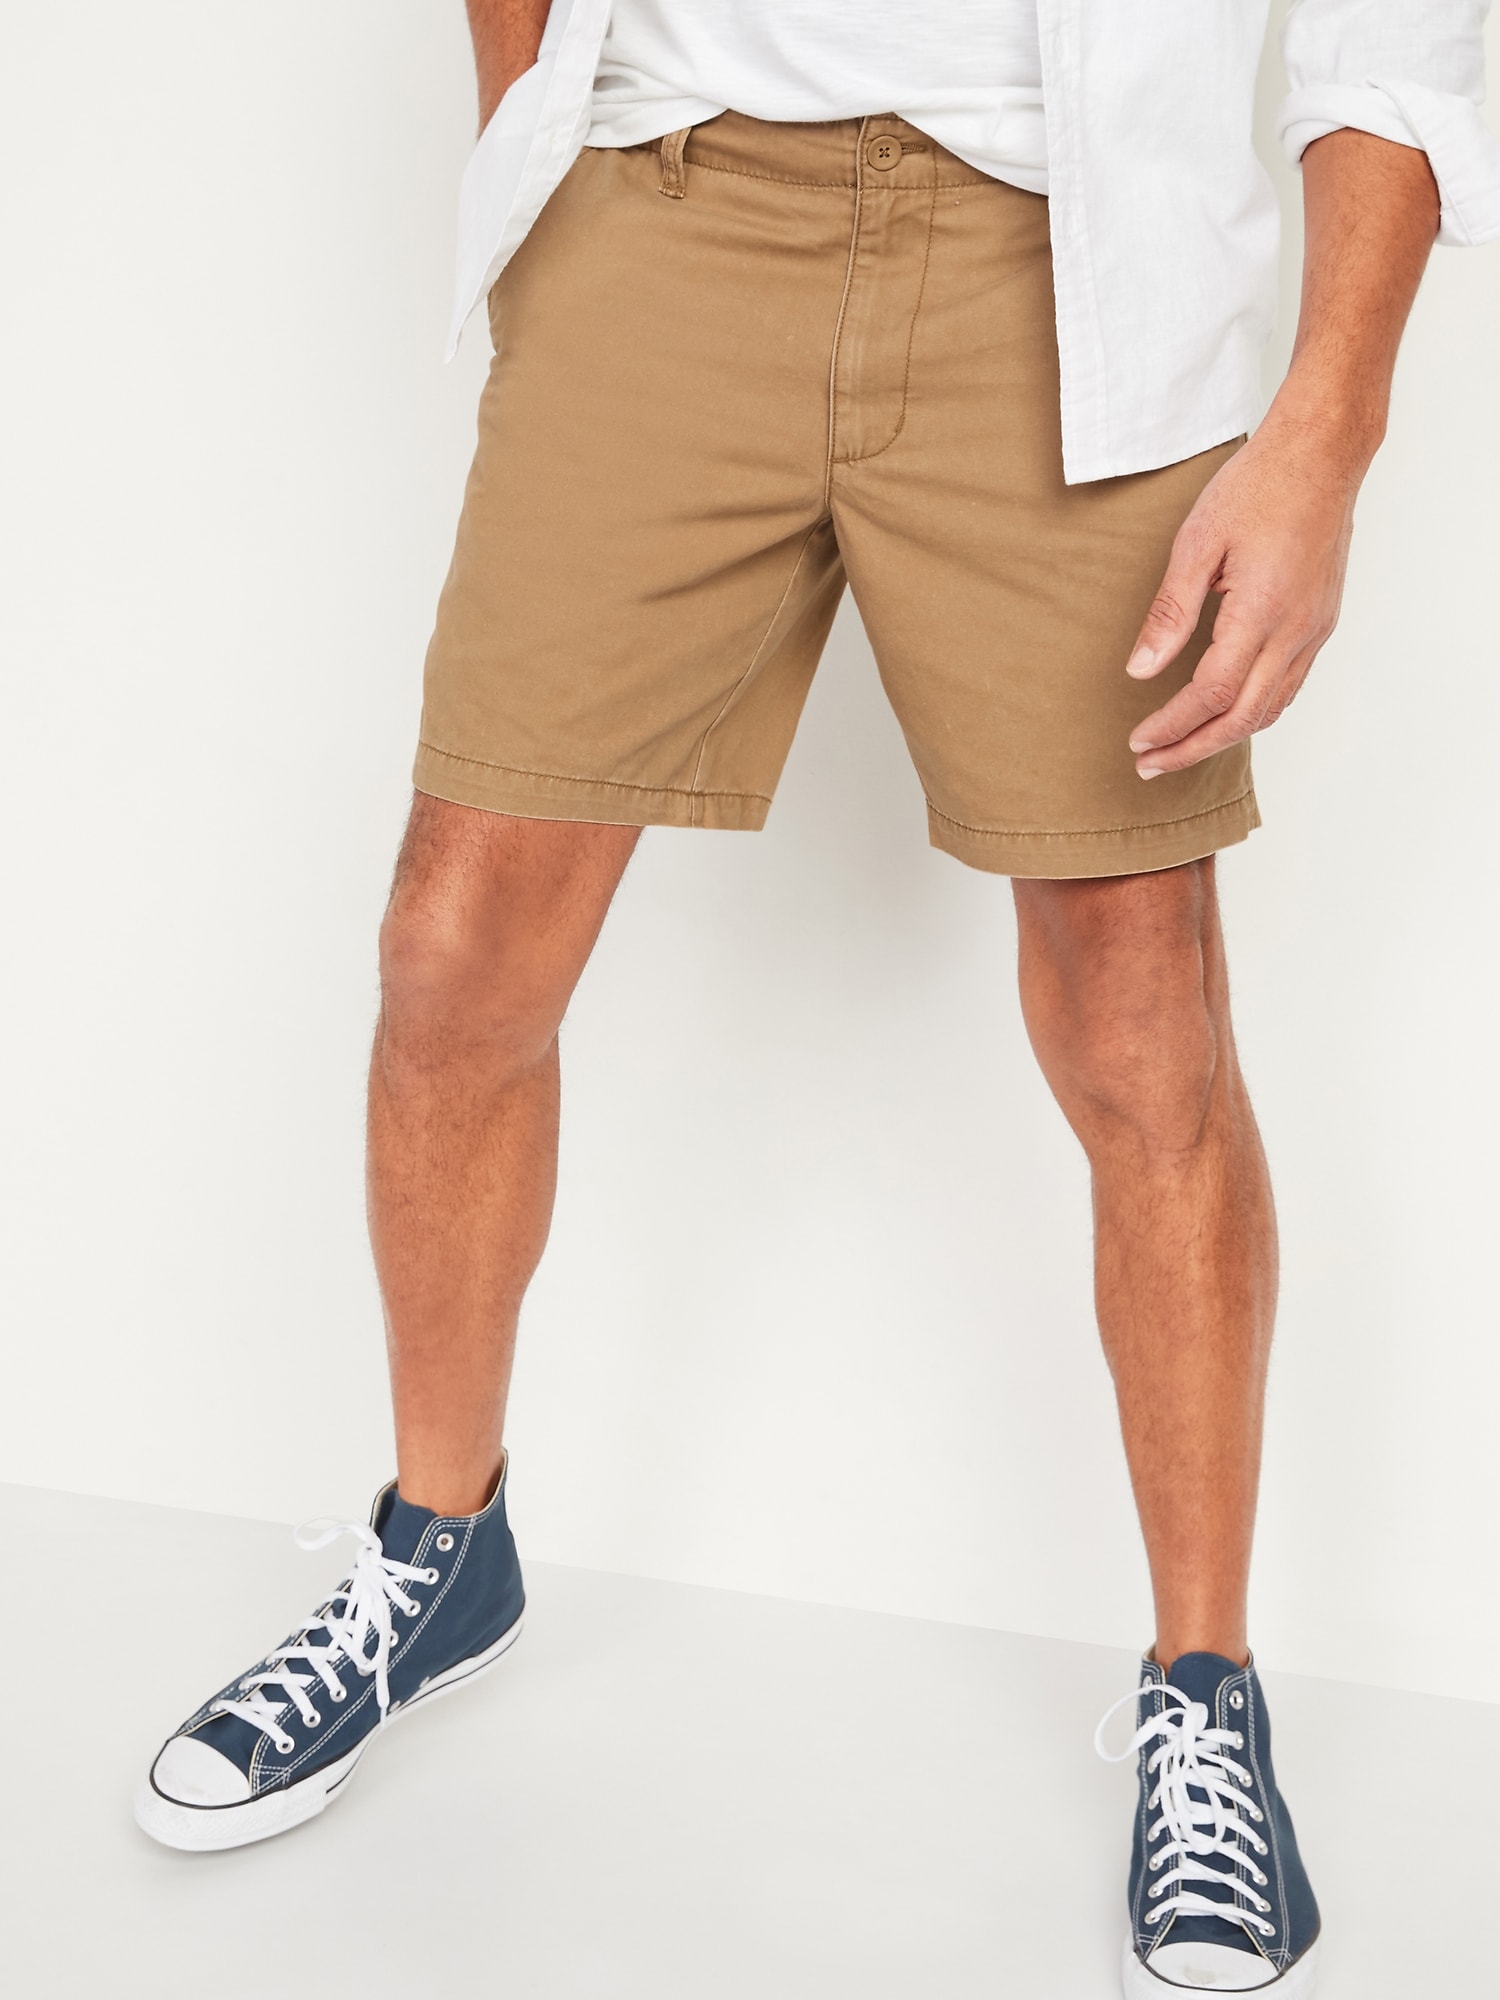 Straight Lived-In Khaki Non-Stretch Shorts for Men - 8-inch inseam